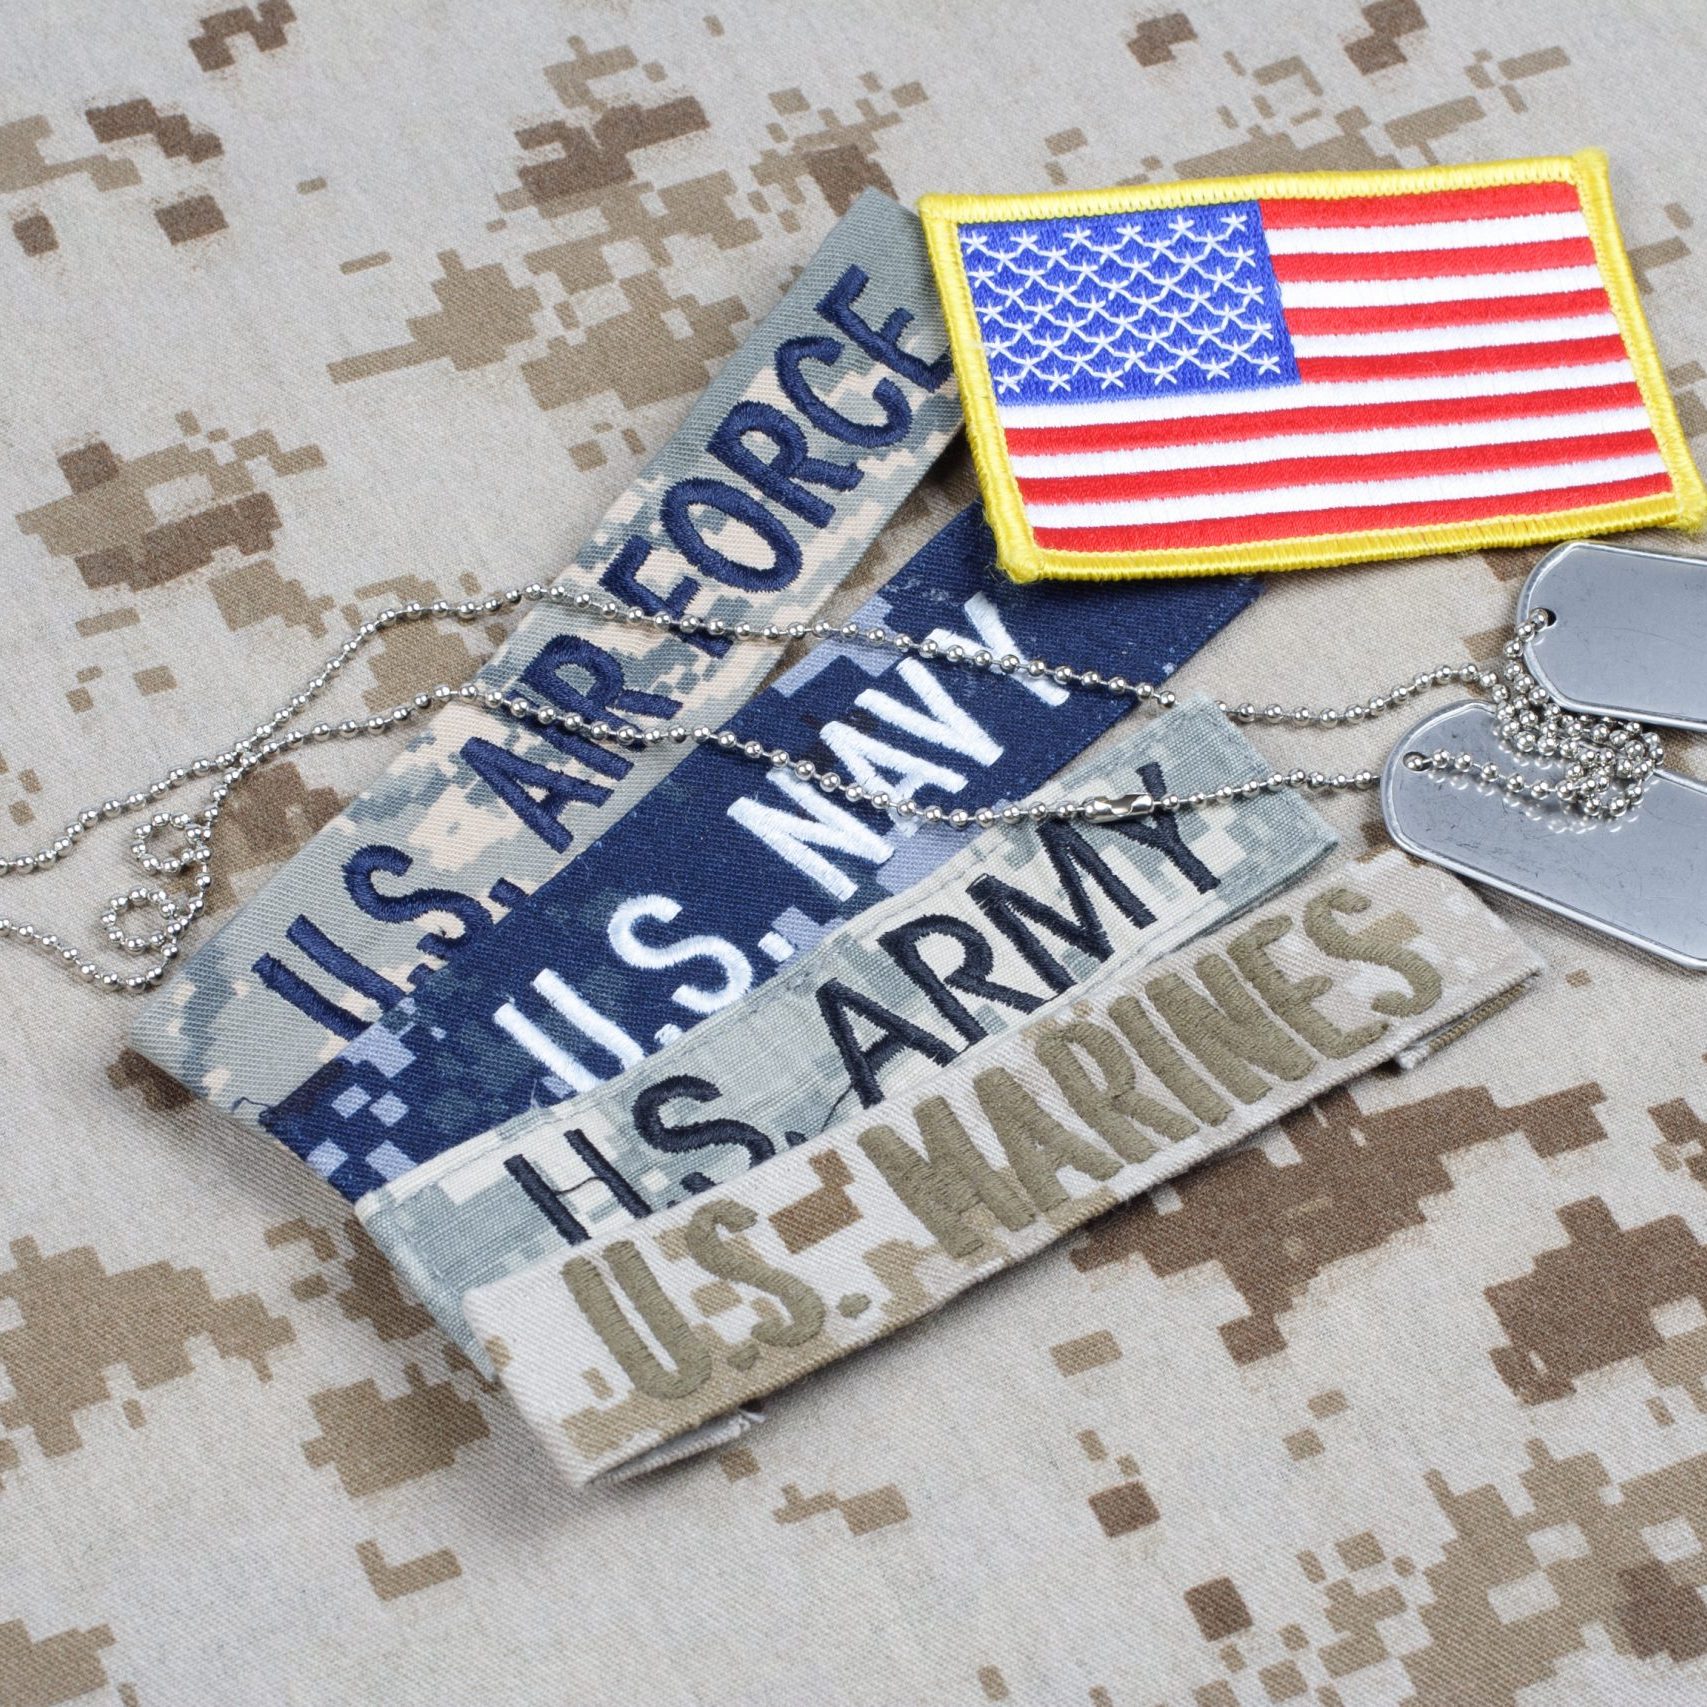 US MILITARY concept with branch tapes and dog tags on camouflage uniform background